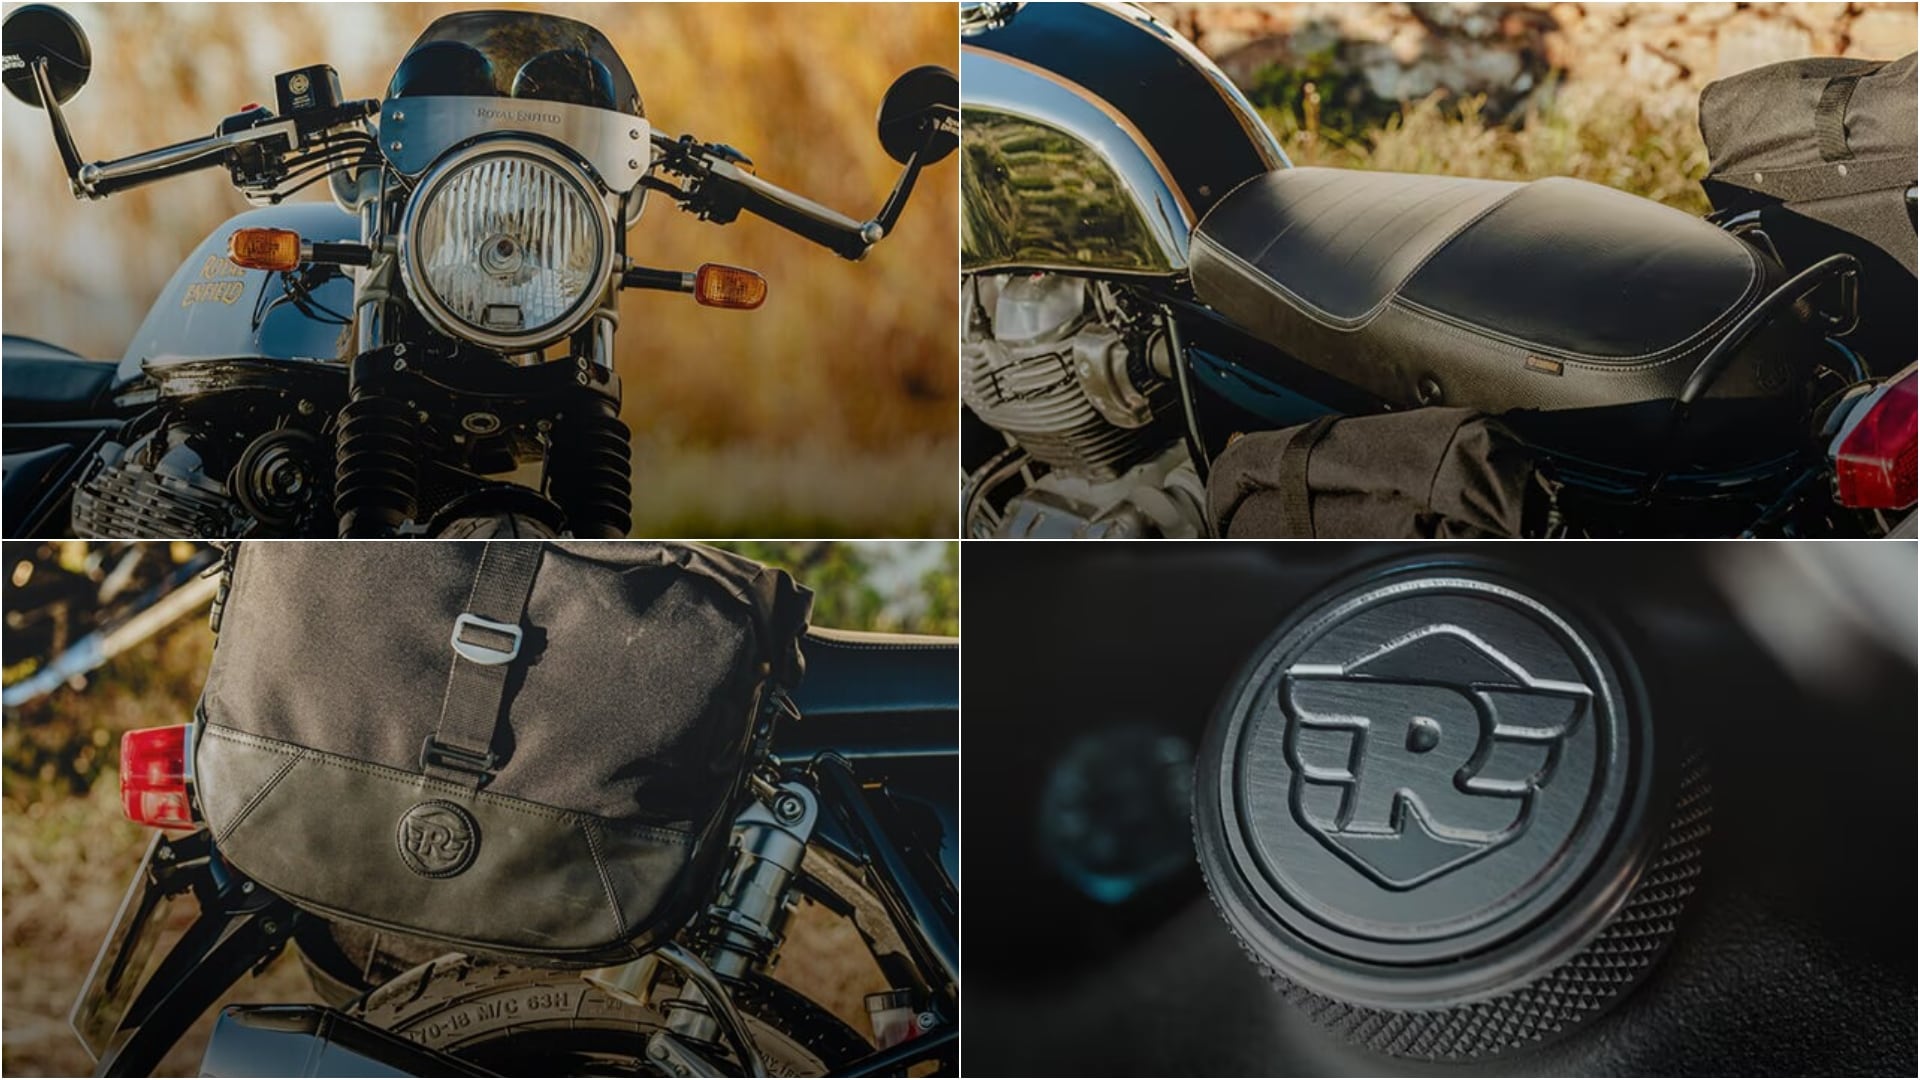 Royal Enfield Continental GT 650 Thunder edition features handlebar mirrors, small tinted fly screens, soft panniers, compact engine guard and more